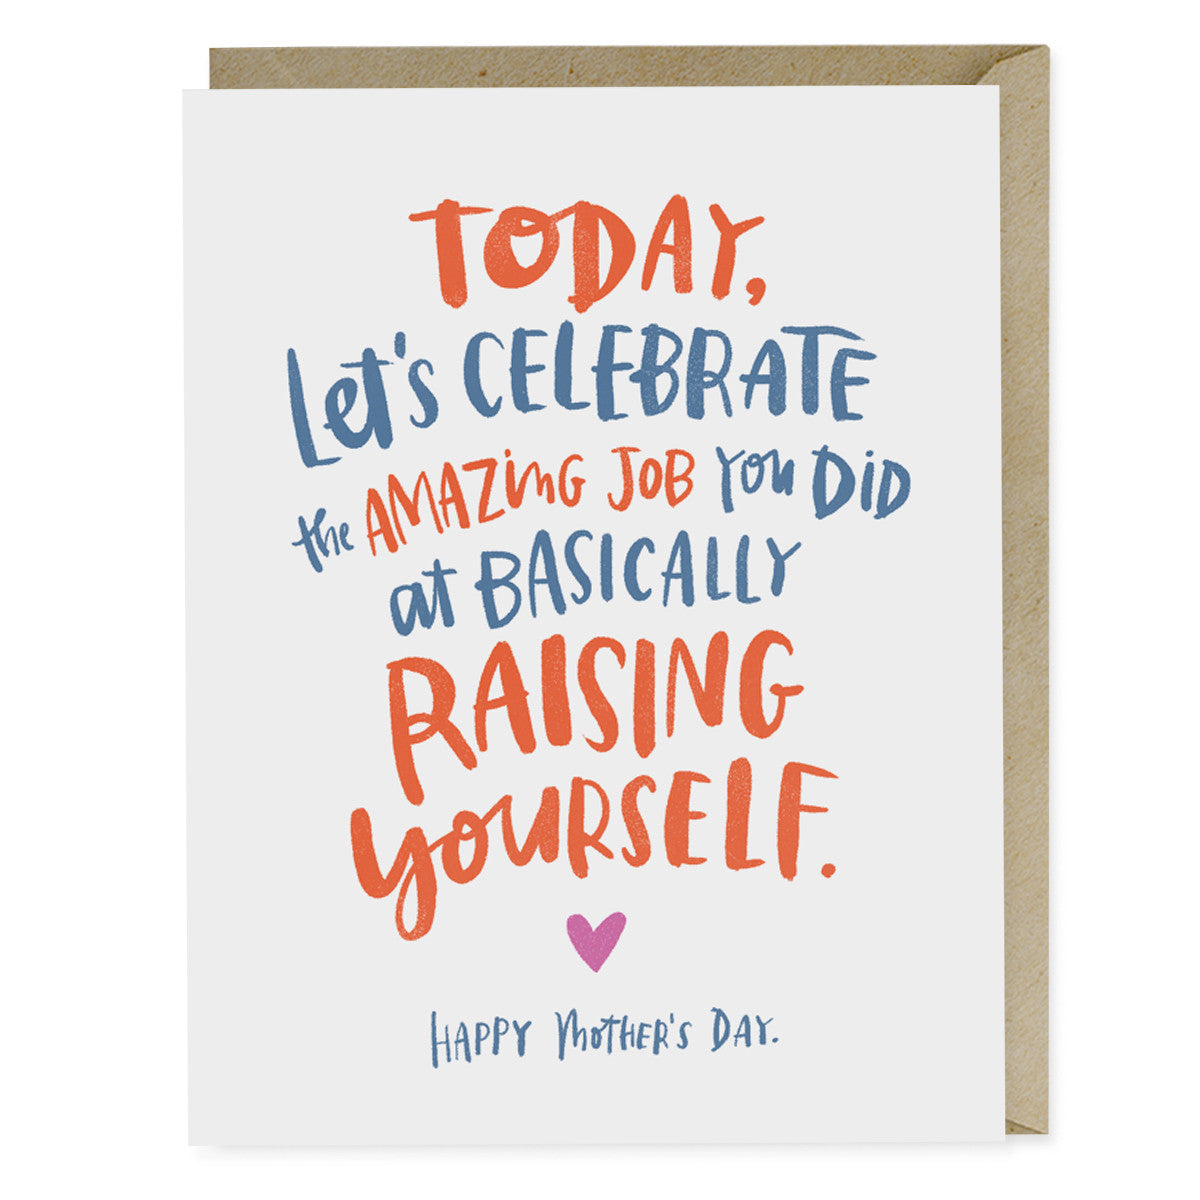 Raised Yourself Mother's Day Card